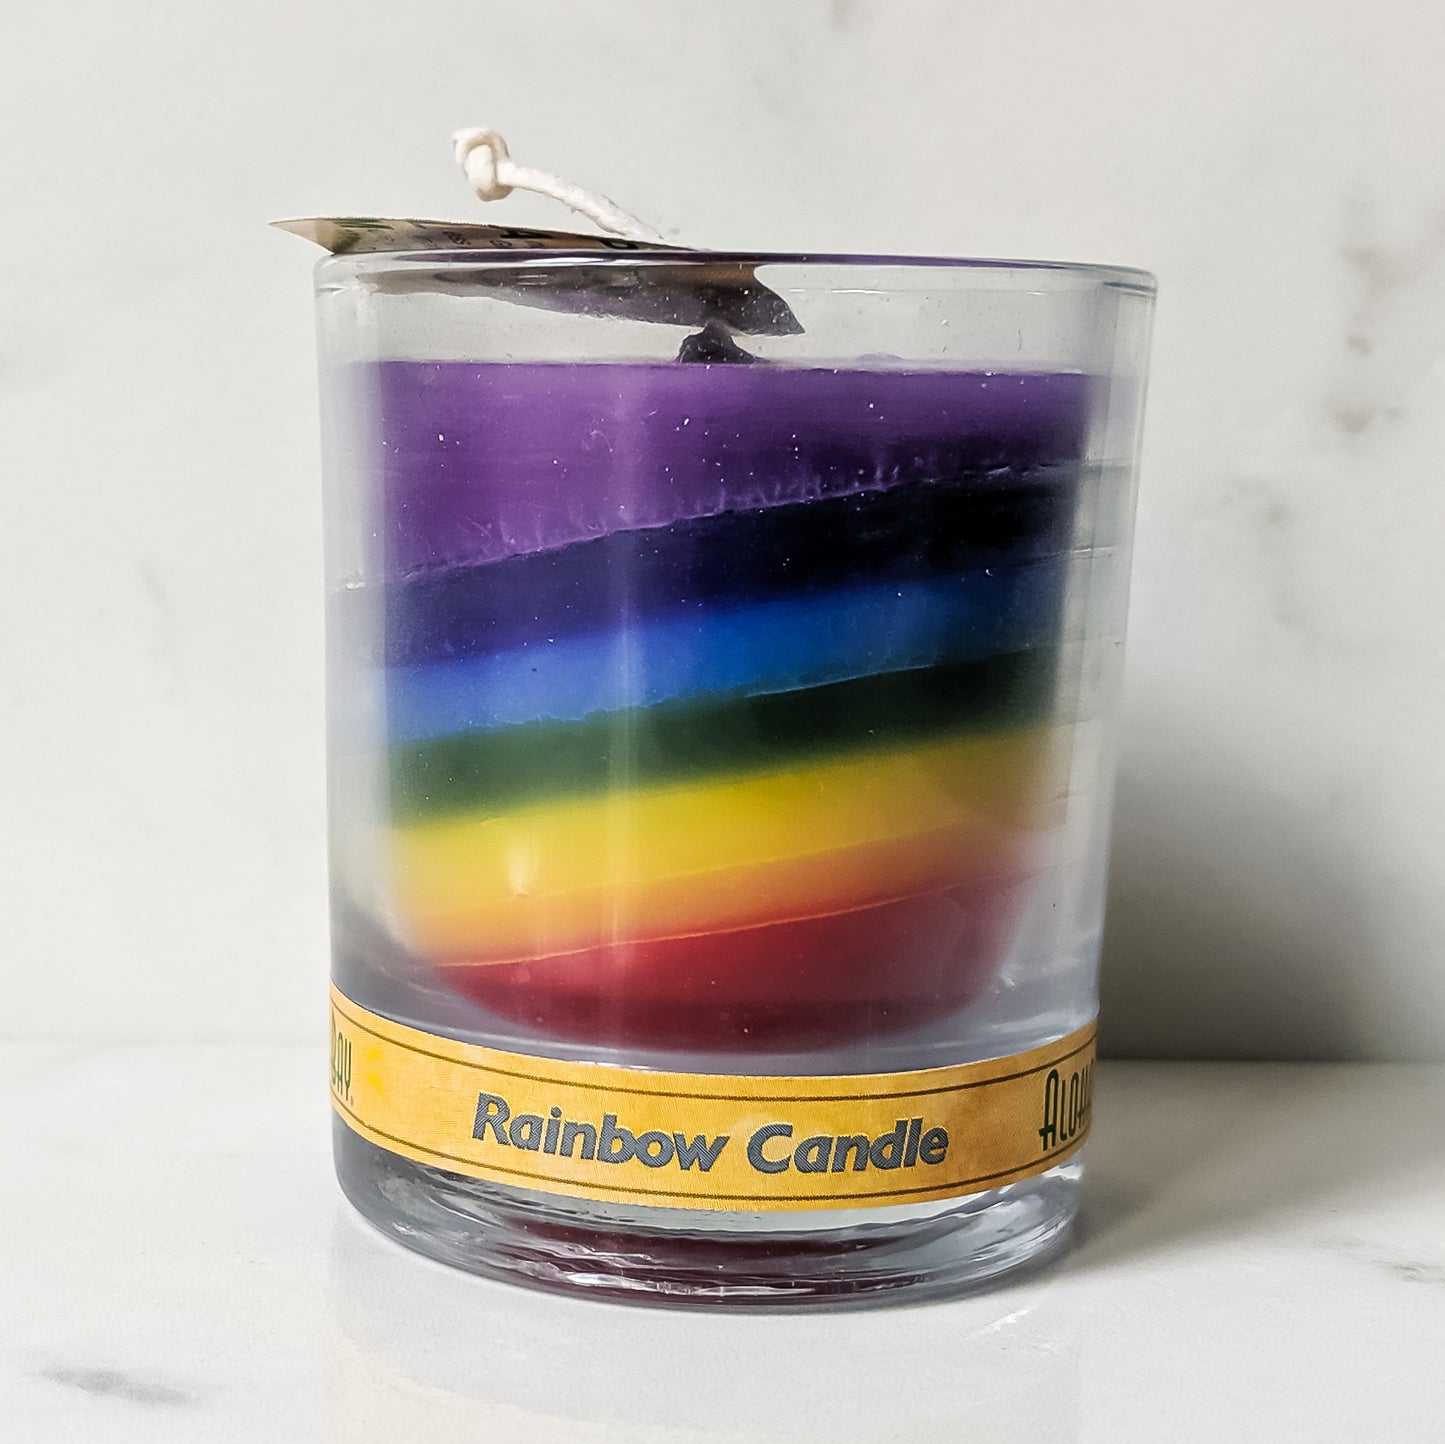 Rainbow Candle (unscented)